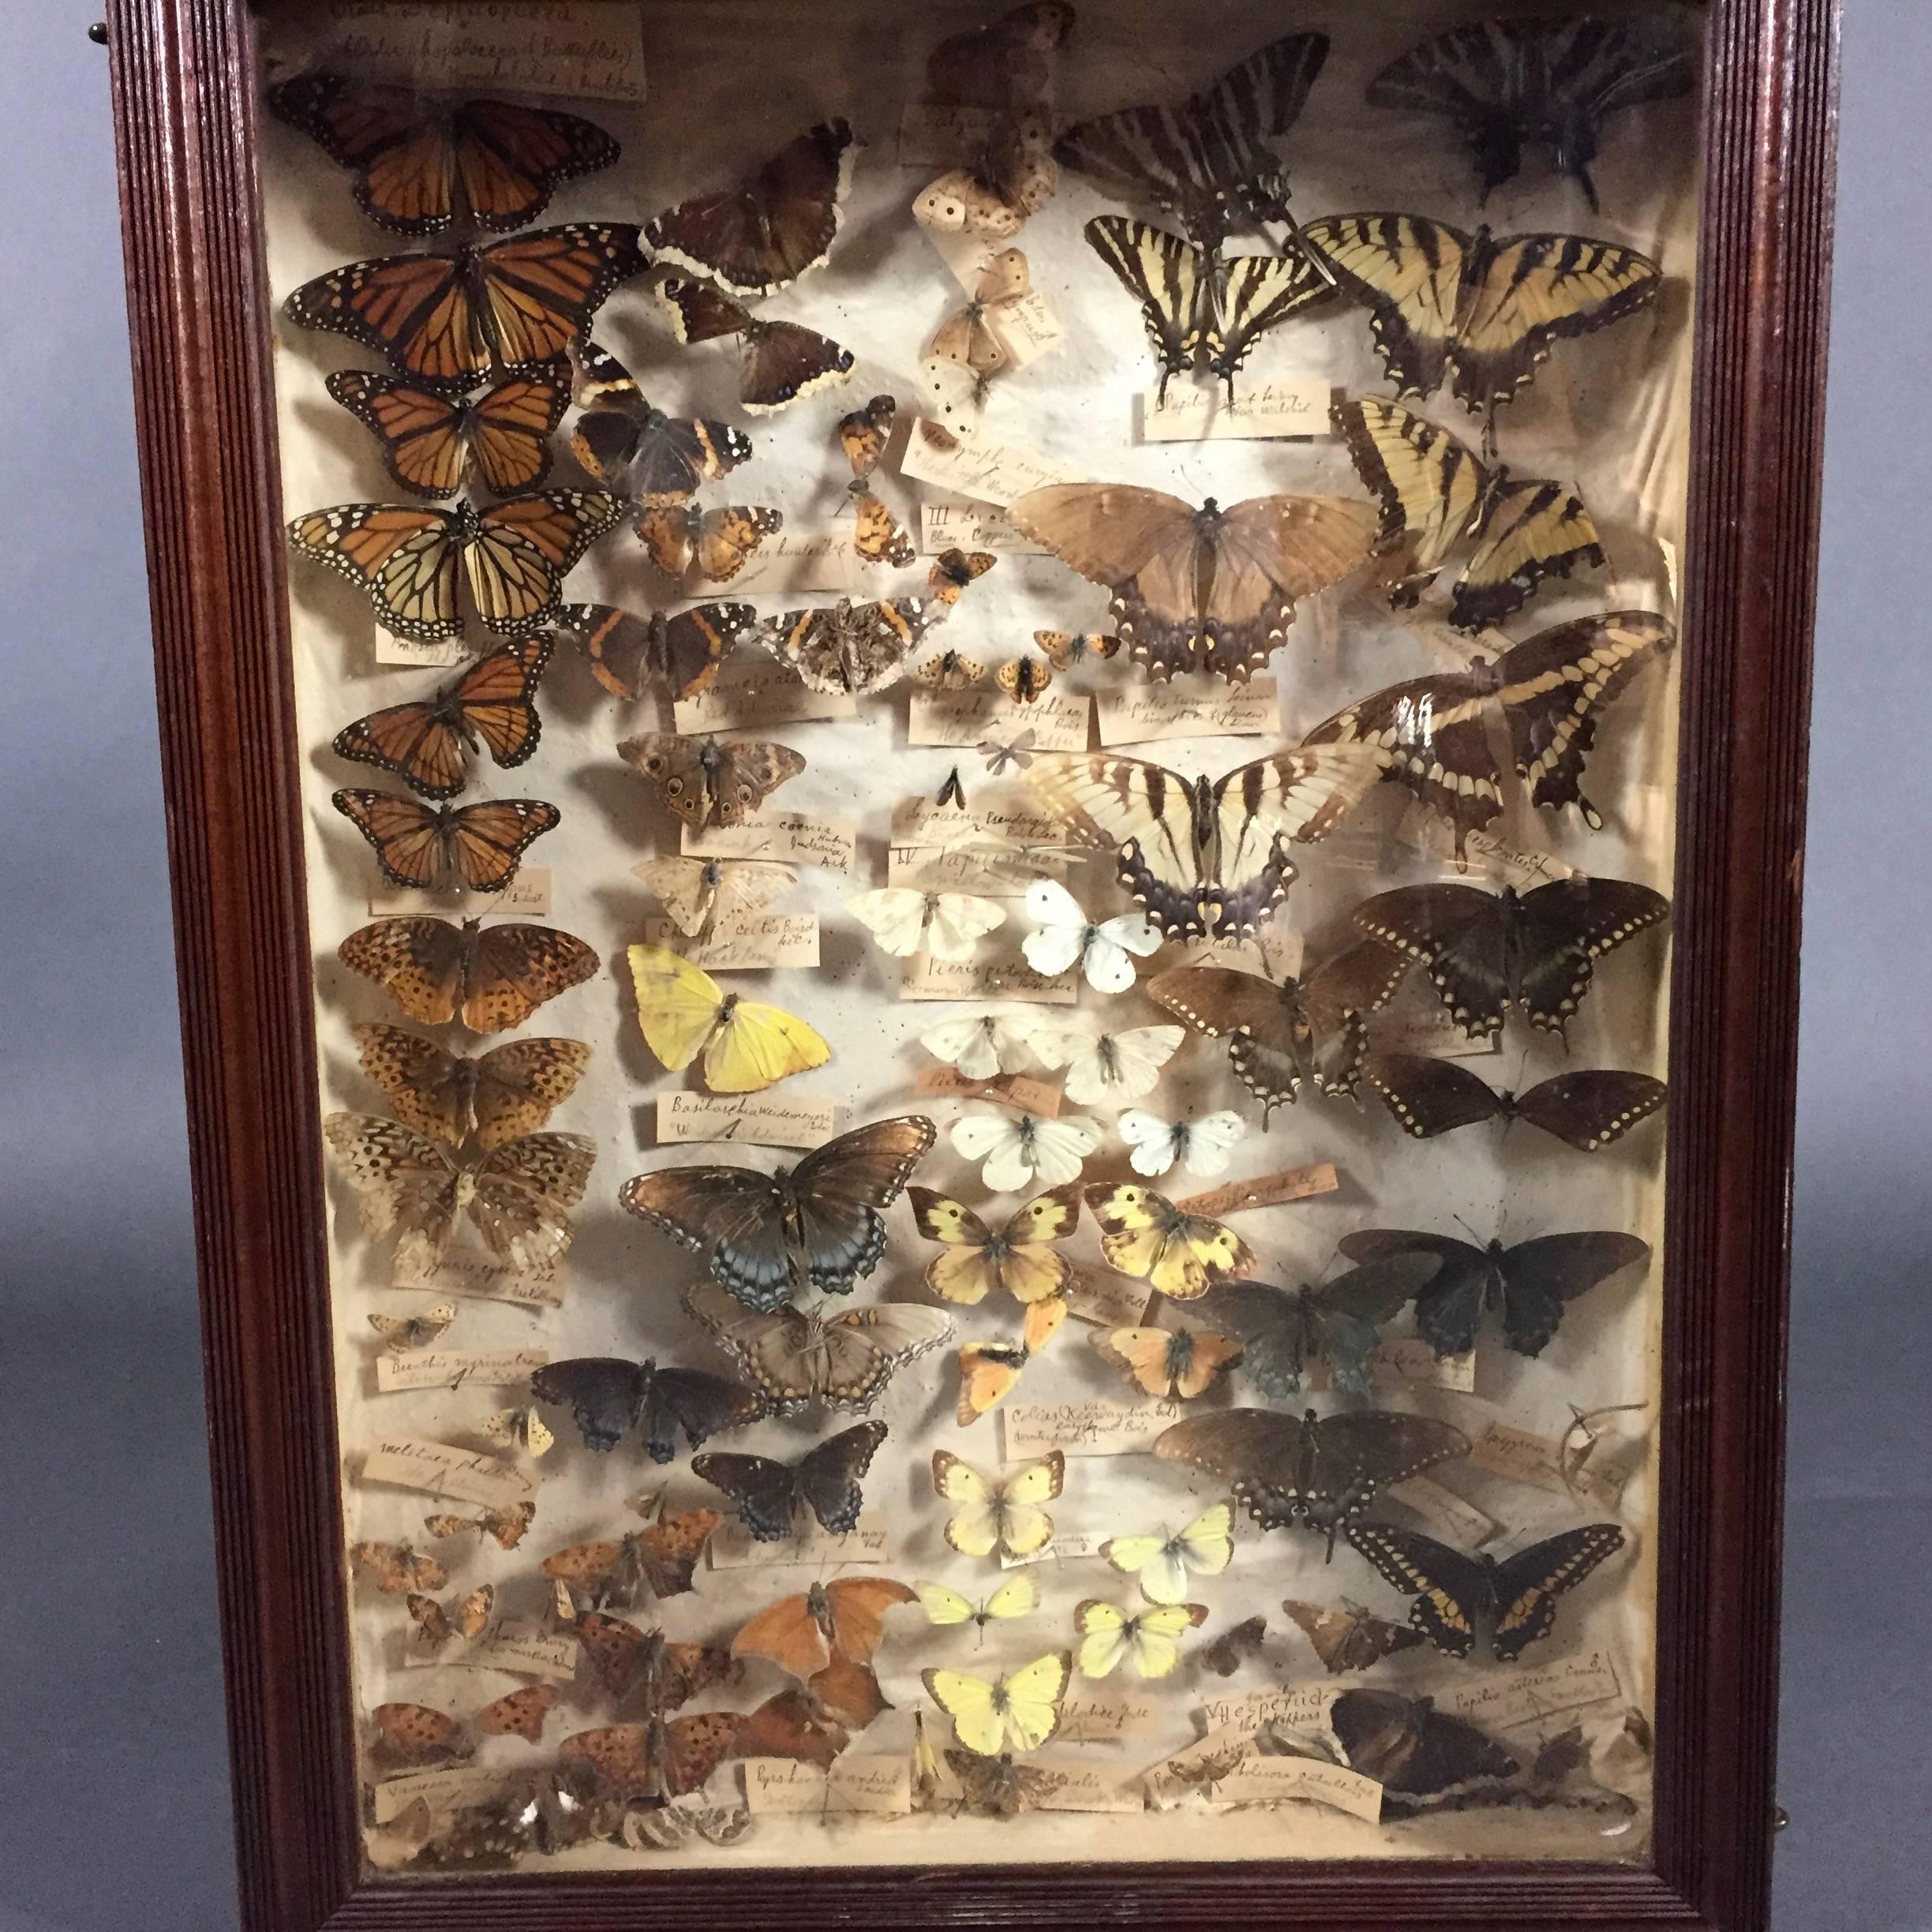 A wonderful and enchanting shadow box filled with eighty-two butterfly specimens, all pinned and labeled with both latin and common name. Thoughtfully arrayed by color and shape. Case front can be opened - held by three small metal clasps. A few